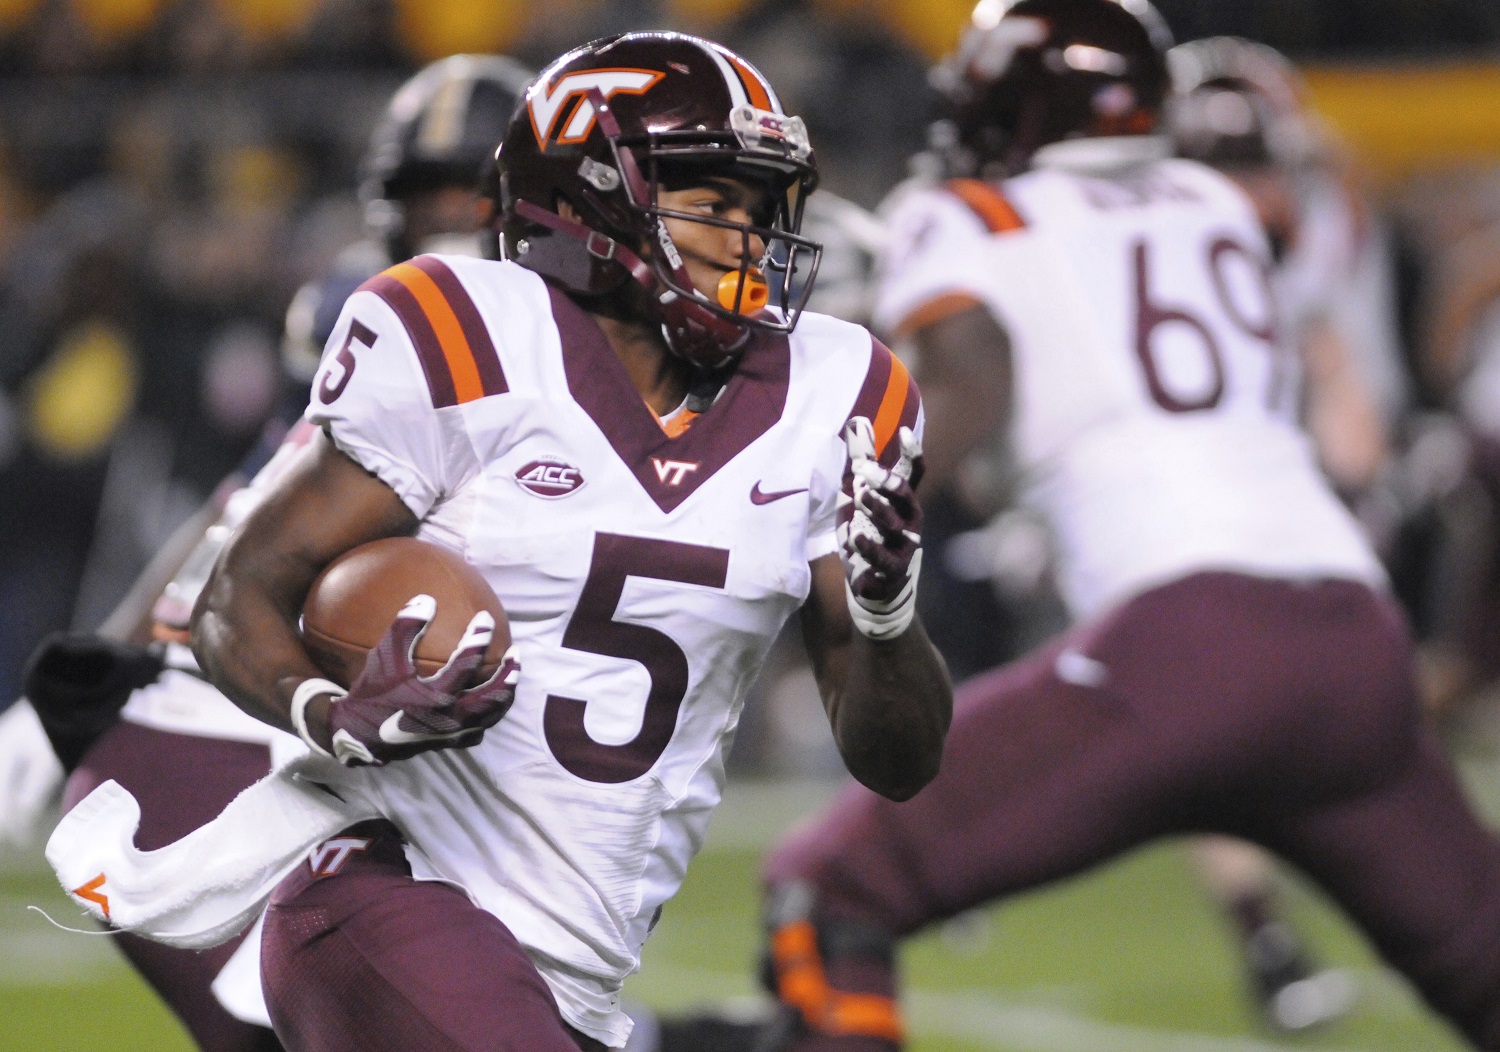 Virginia Tech wide receiver Cam Phillips (5) picks up yardage against Pittsburgh during an NCAA college football game Thursday, Oct. 27, 2016, in Pittsburgh. (AP Photo/John Heller)